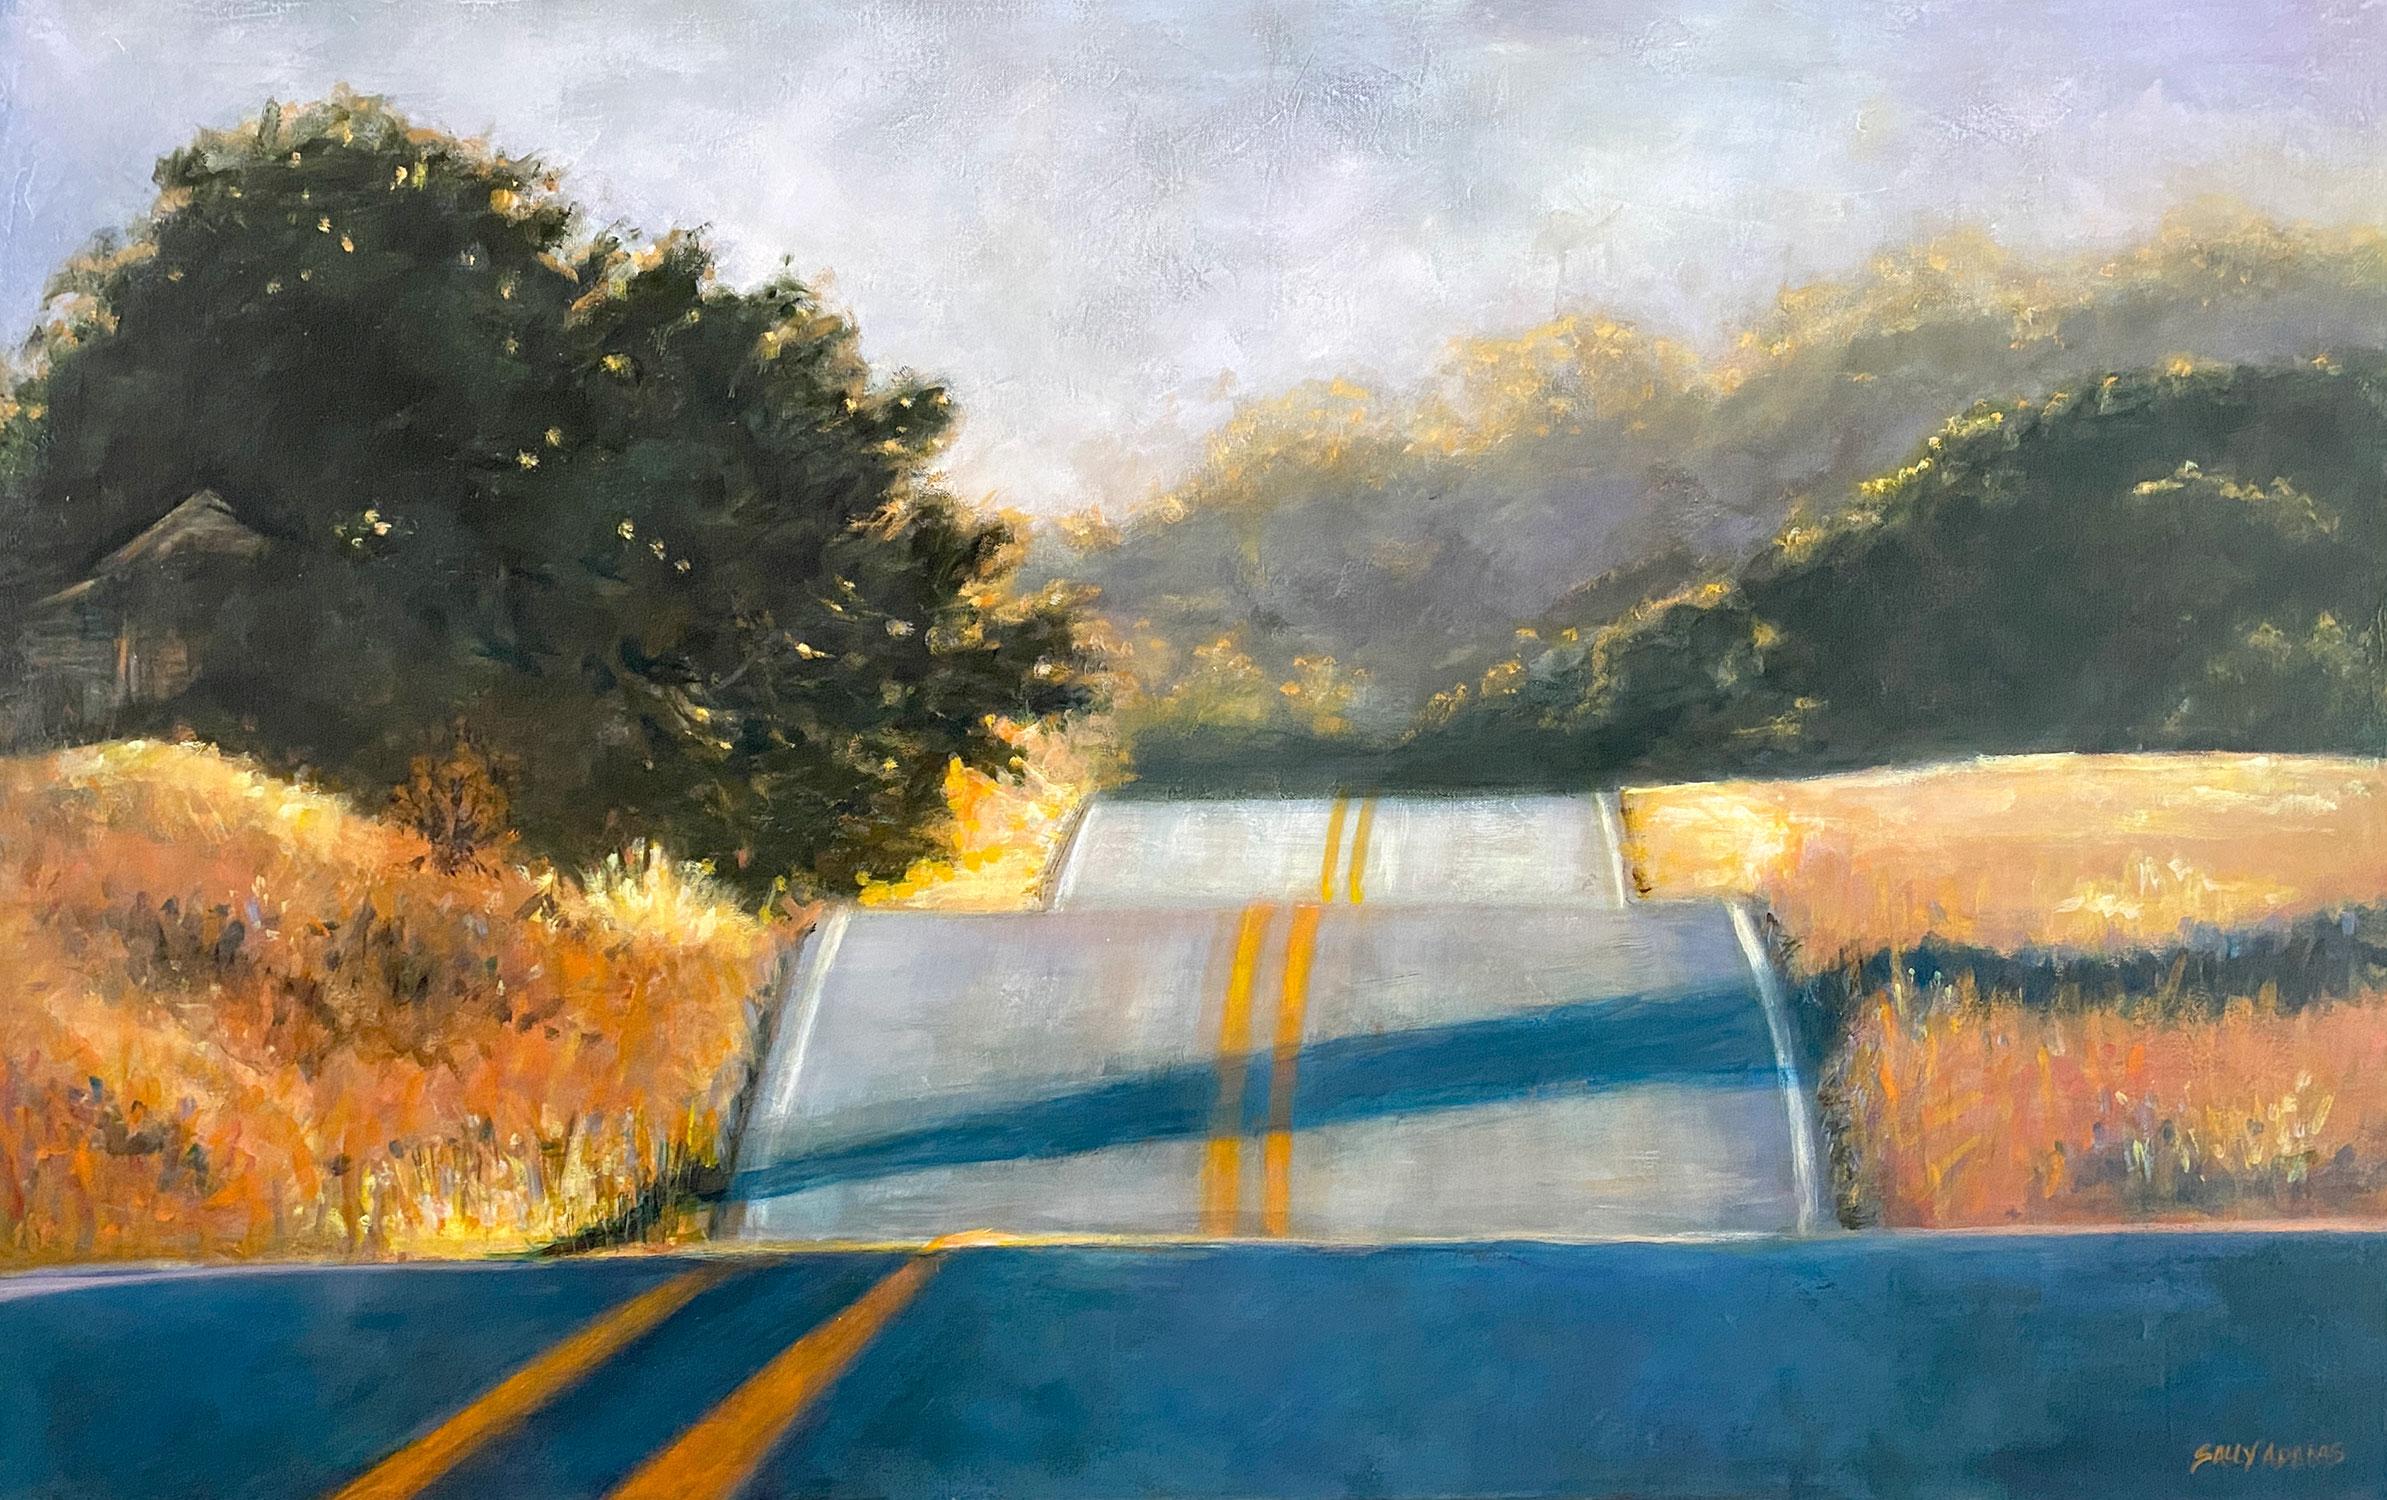 Sally Adams Landscape Painting - The Road, Original Painting